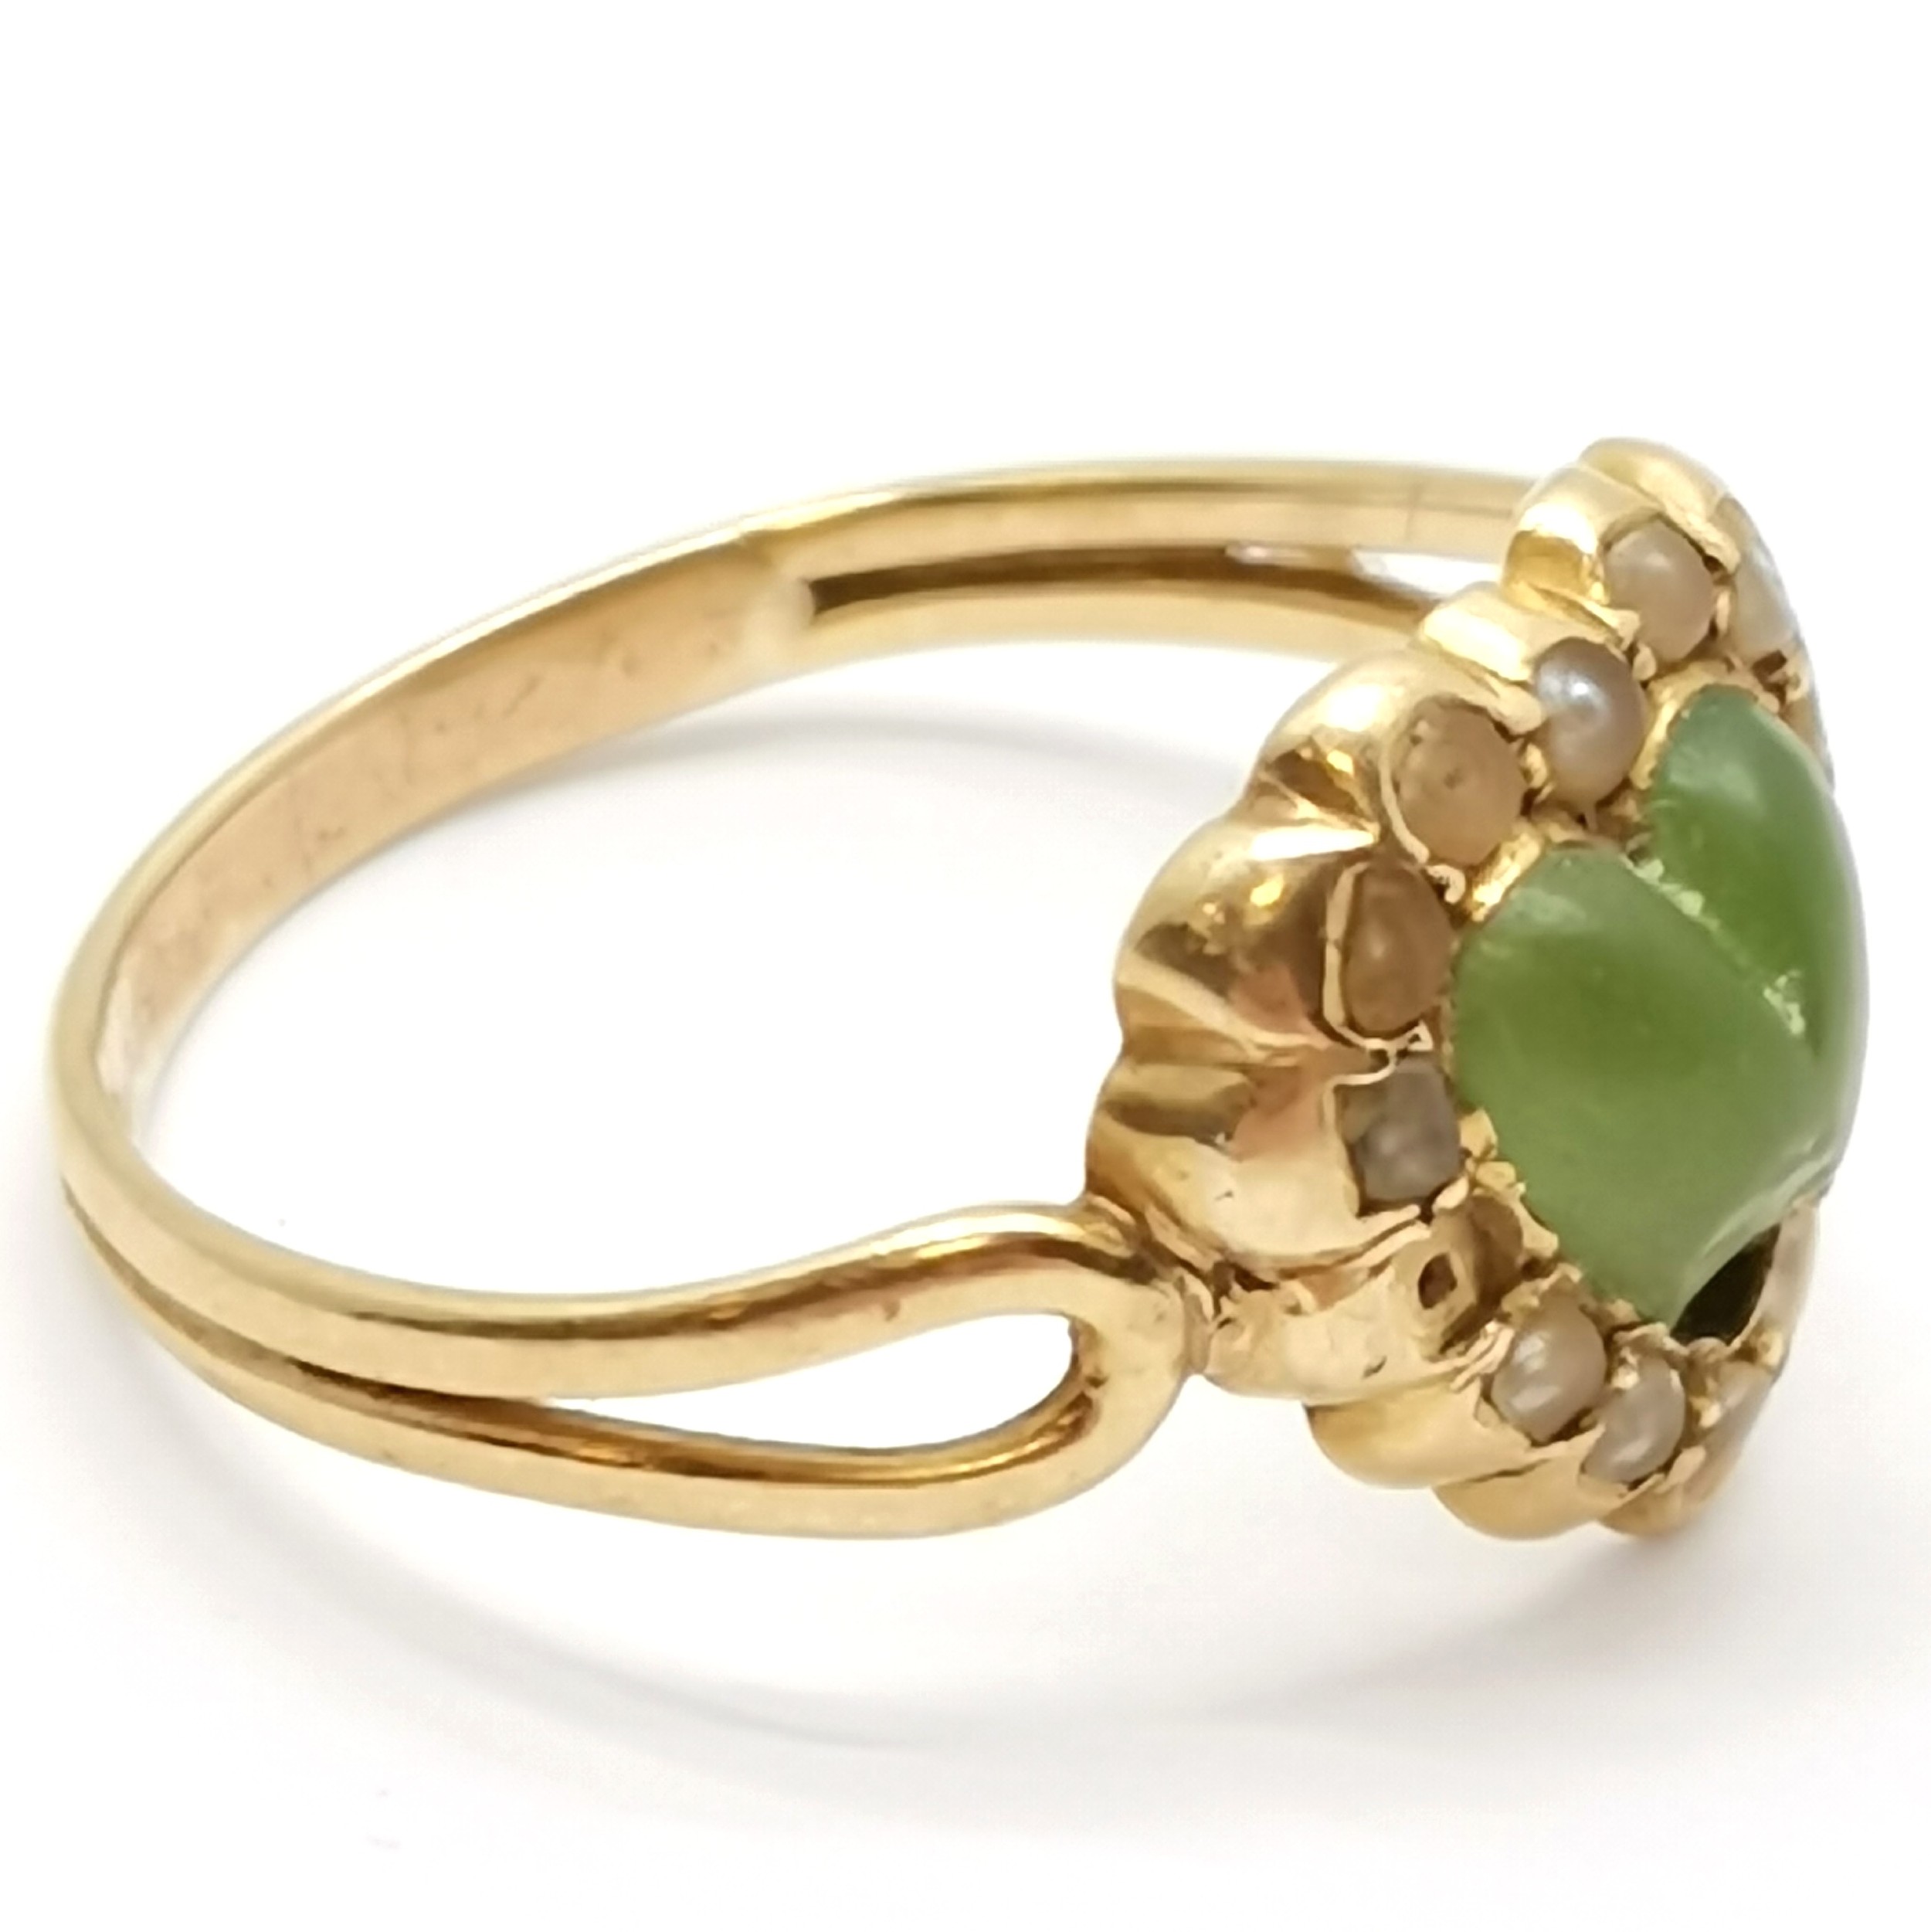 Antique unmarked gold ring with heart shaped green stone with pearl surround (missing 1 pearl) - - Image 3 of 4